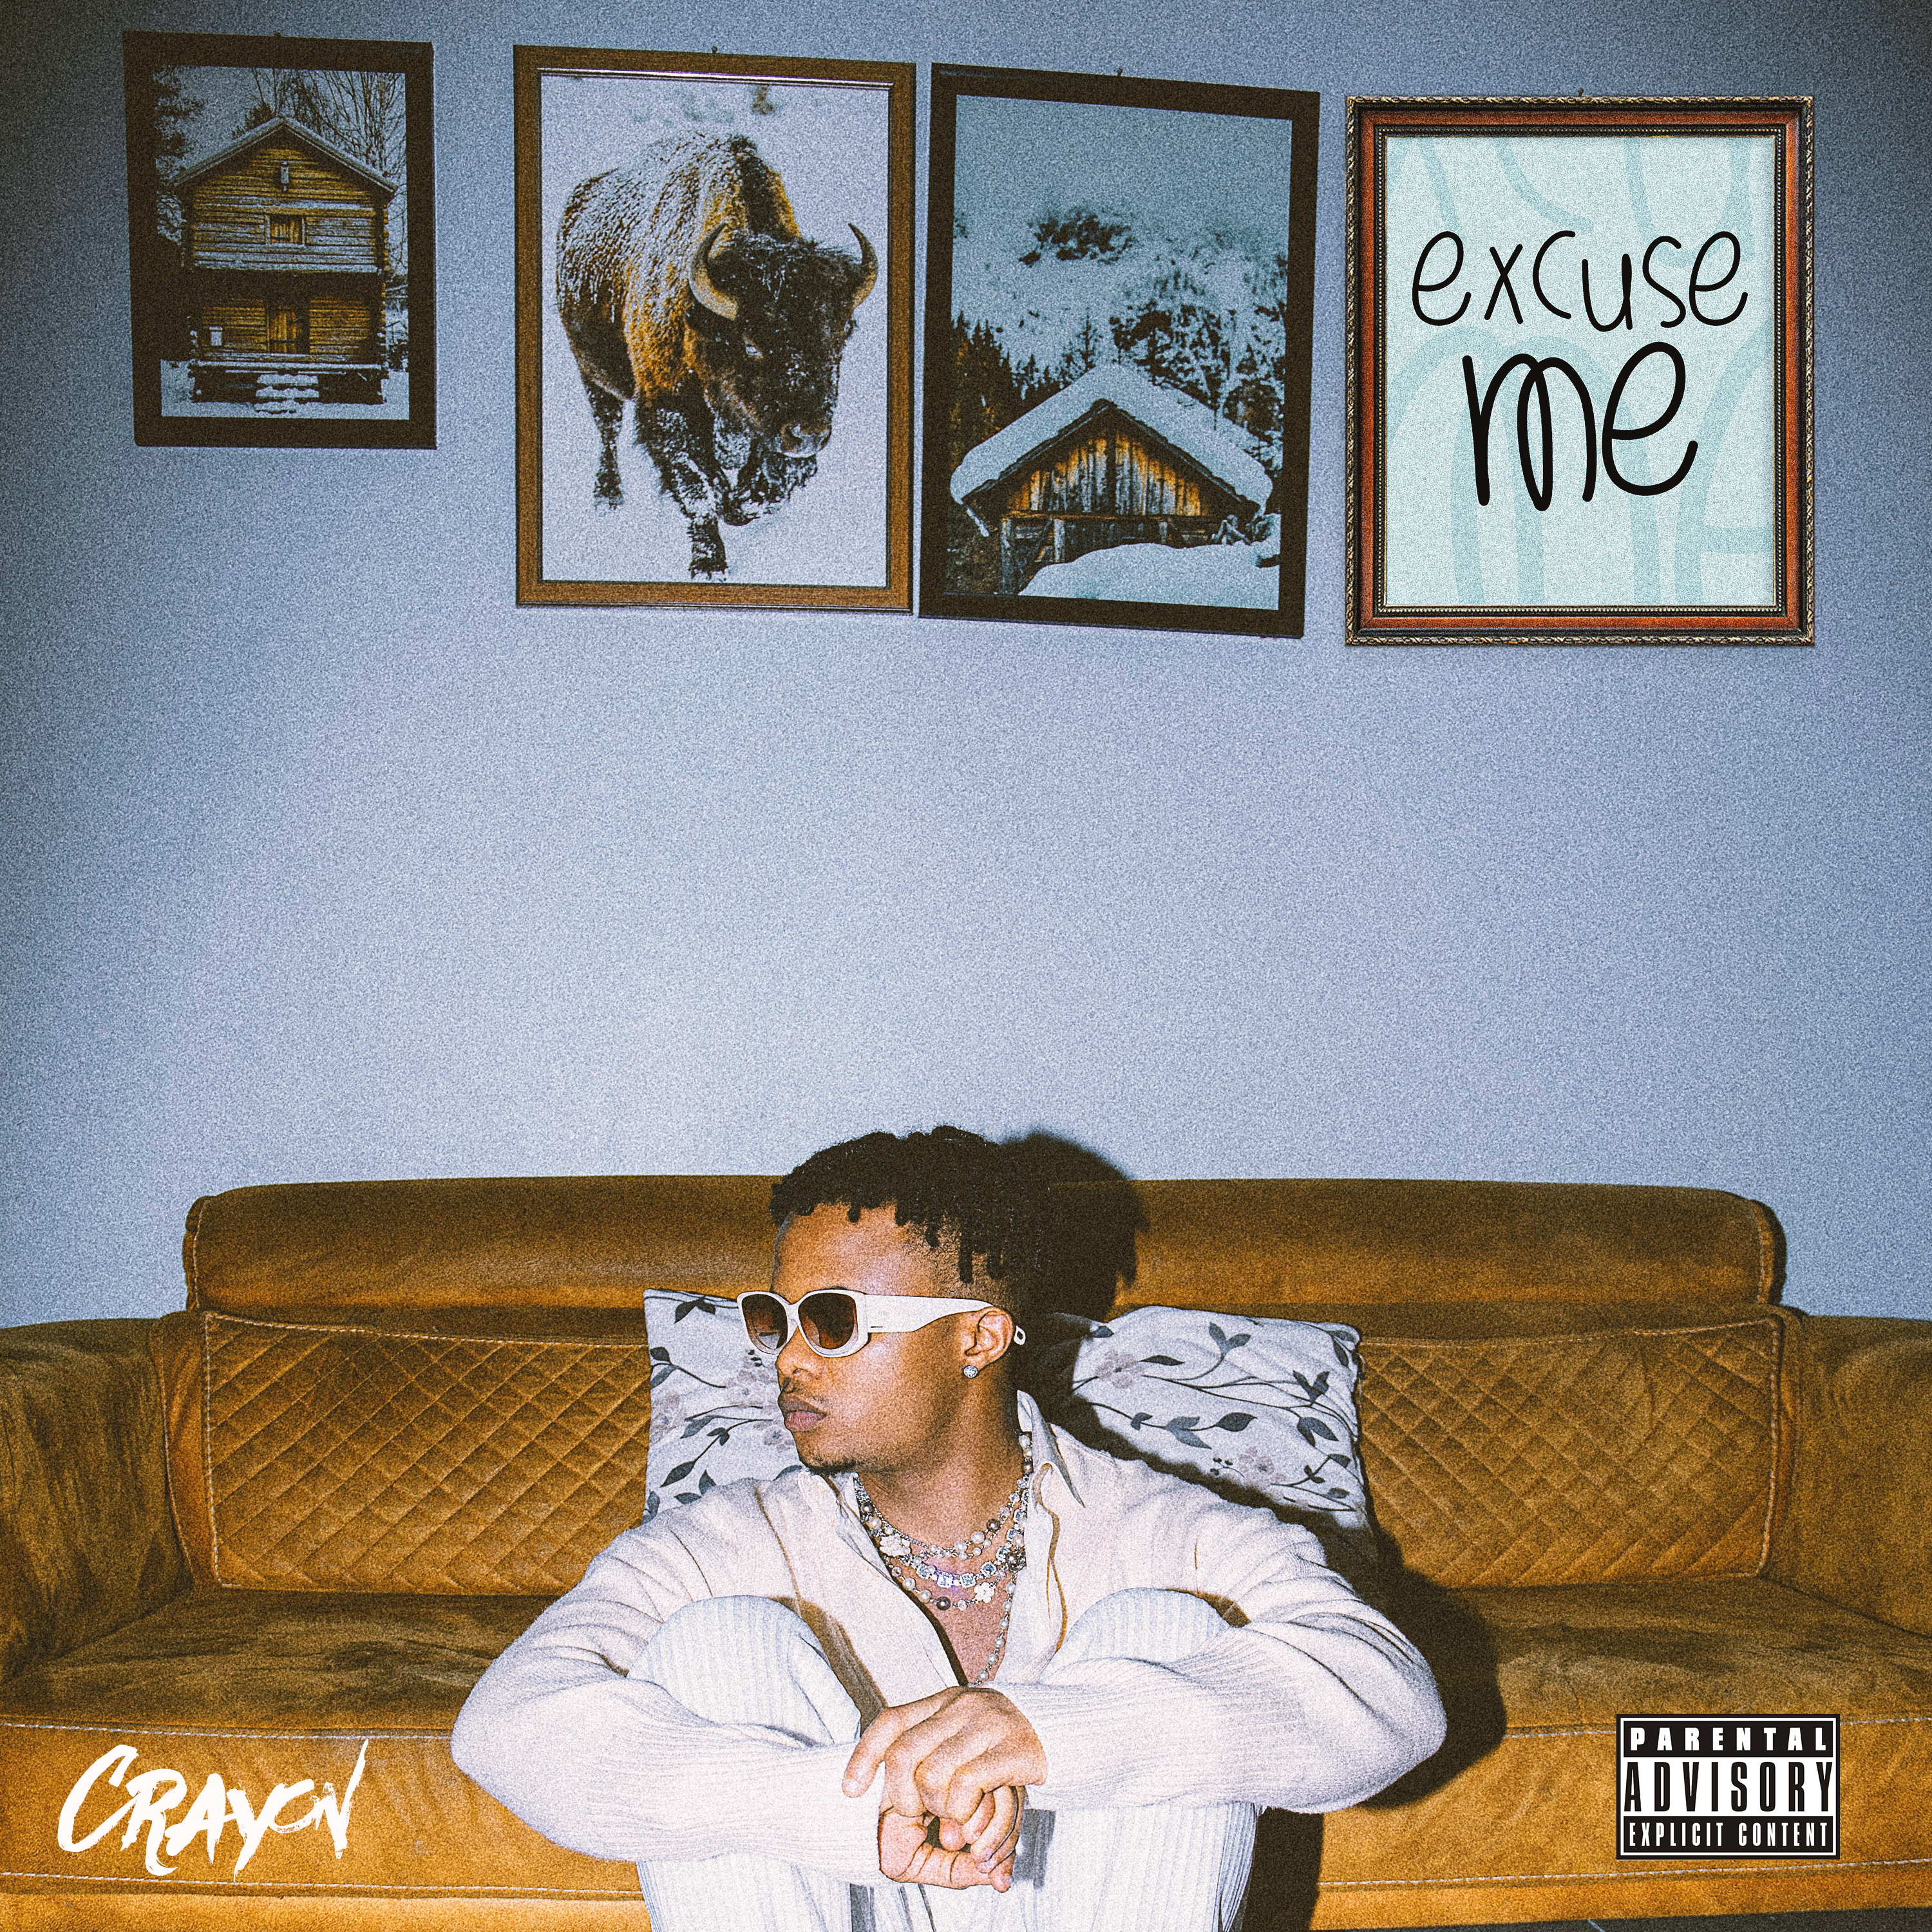 Crayon and Toby Shang Combine on New Single, Excuse Me